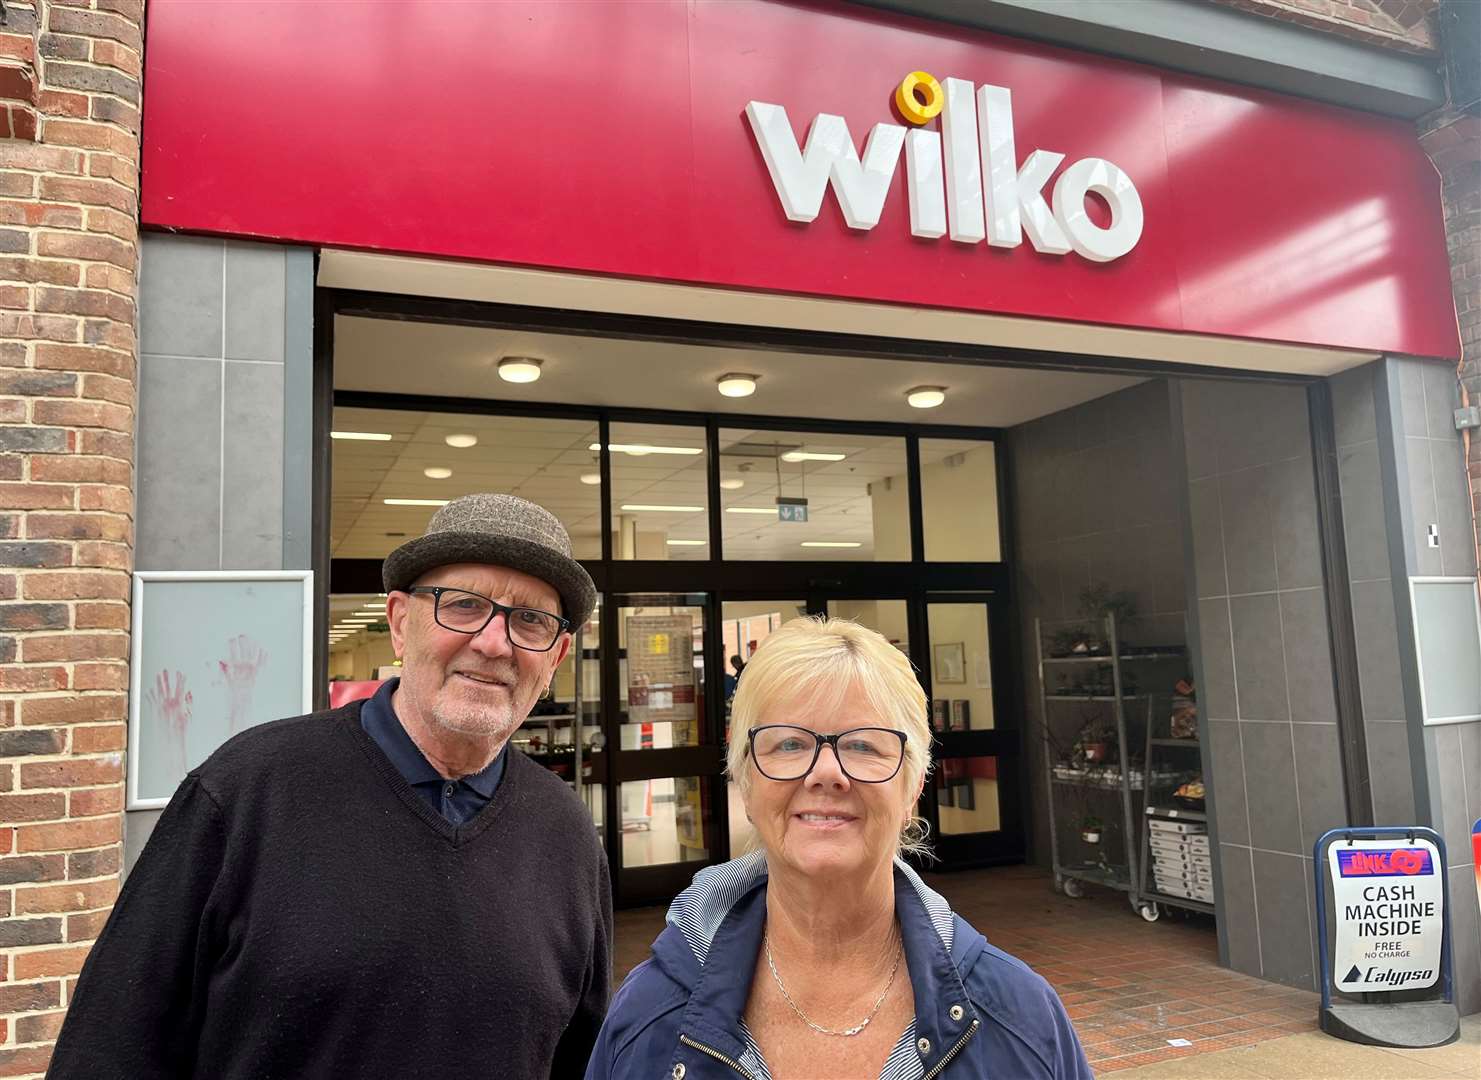 Terry and Sally Cridland say they thought a few months ago it was only a matter of time until the store shuts